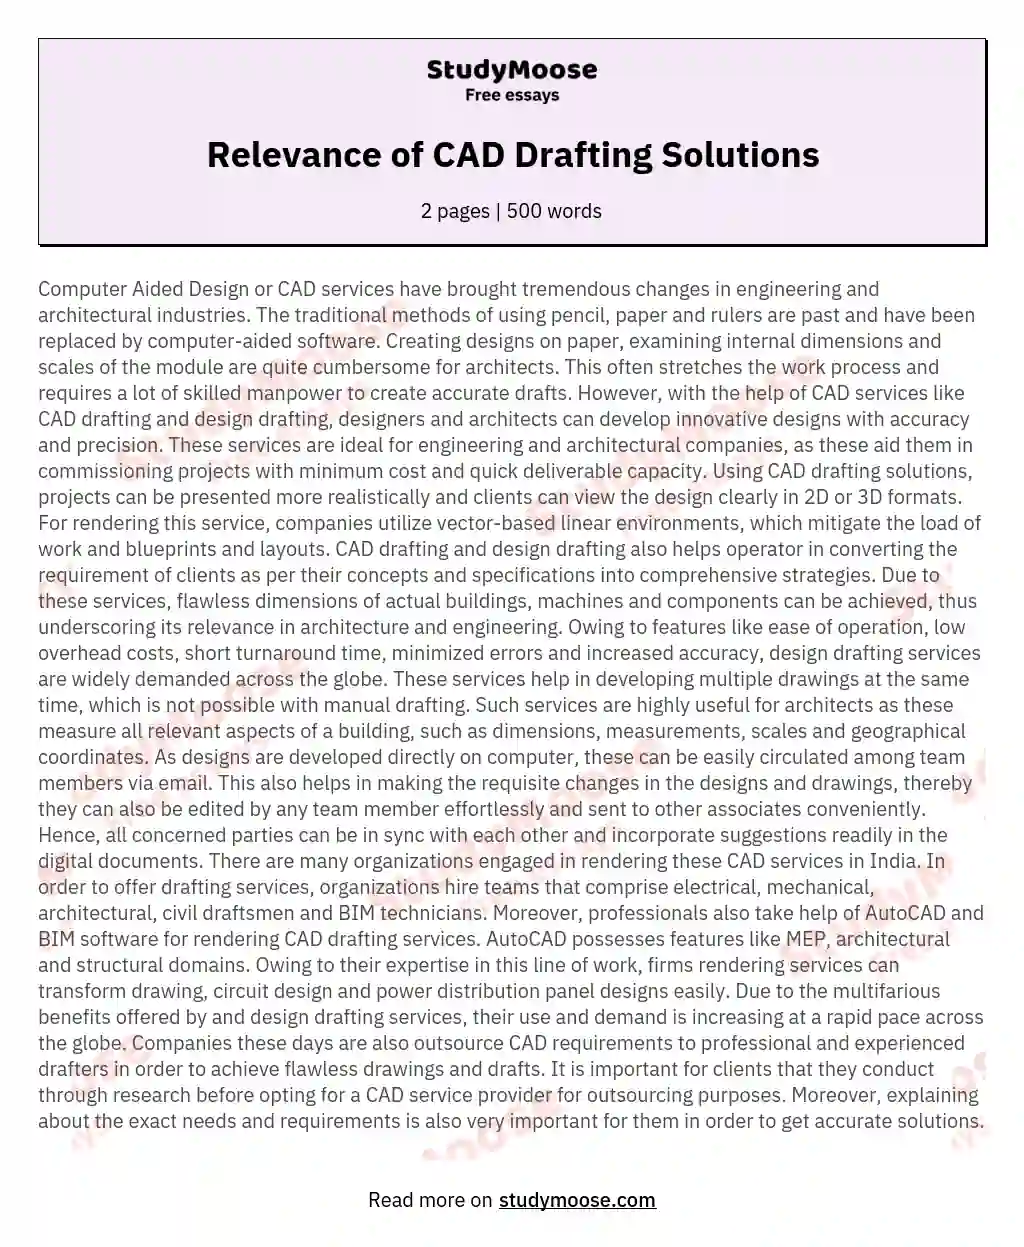 Relevance of CAD Drafting Solutions essay